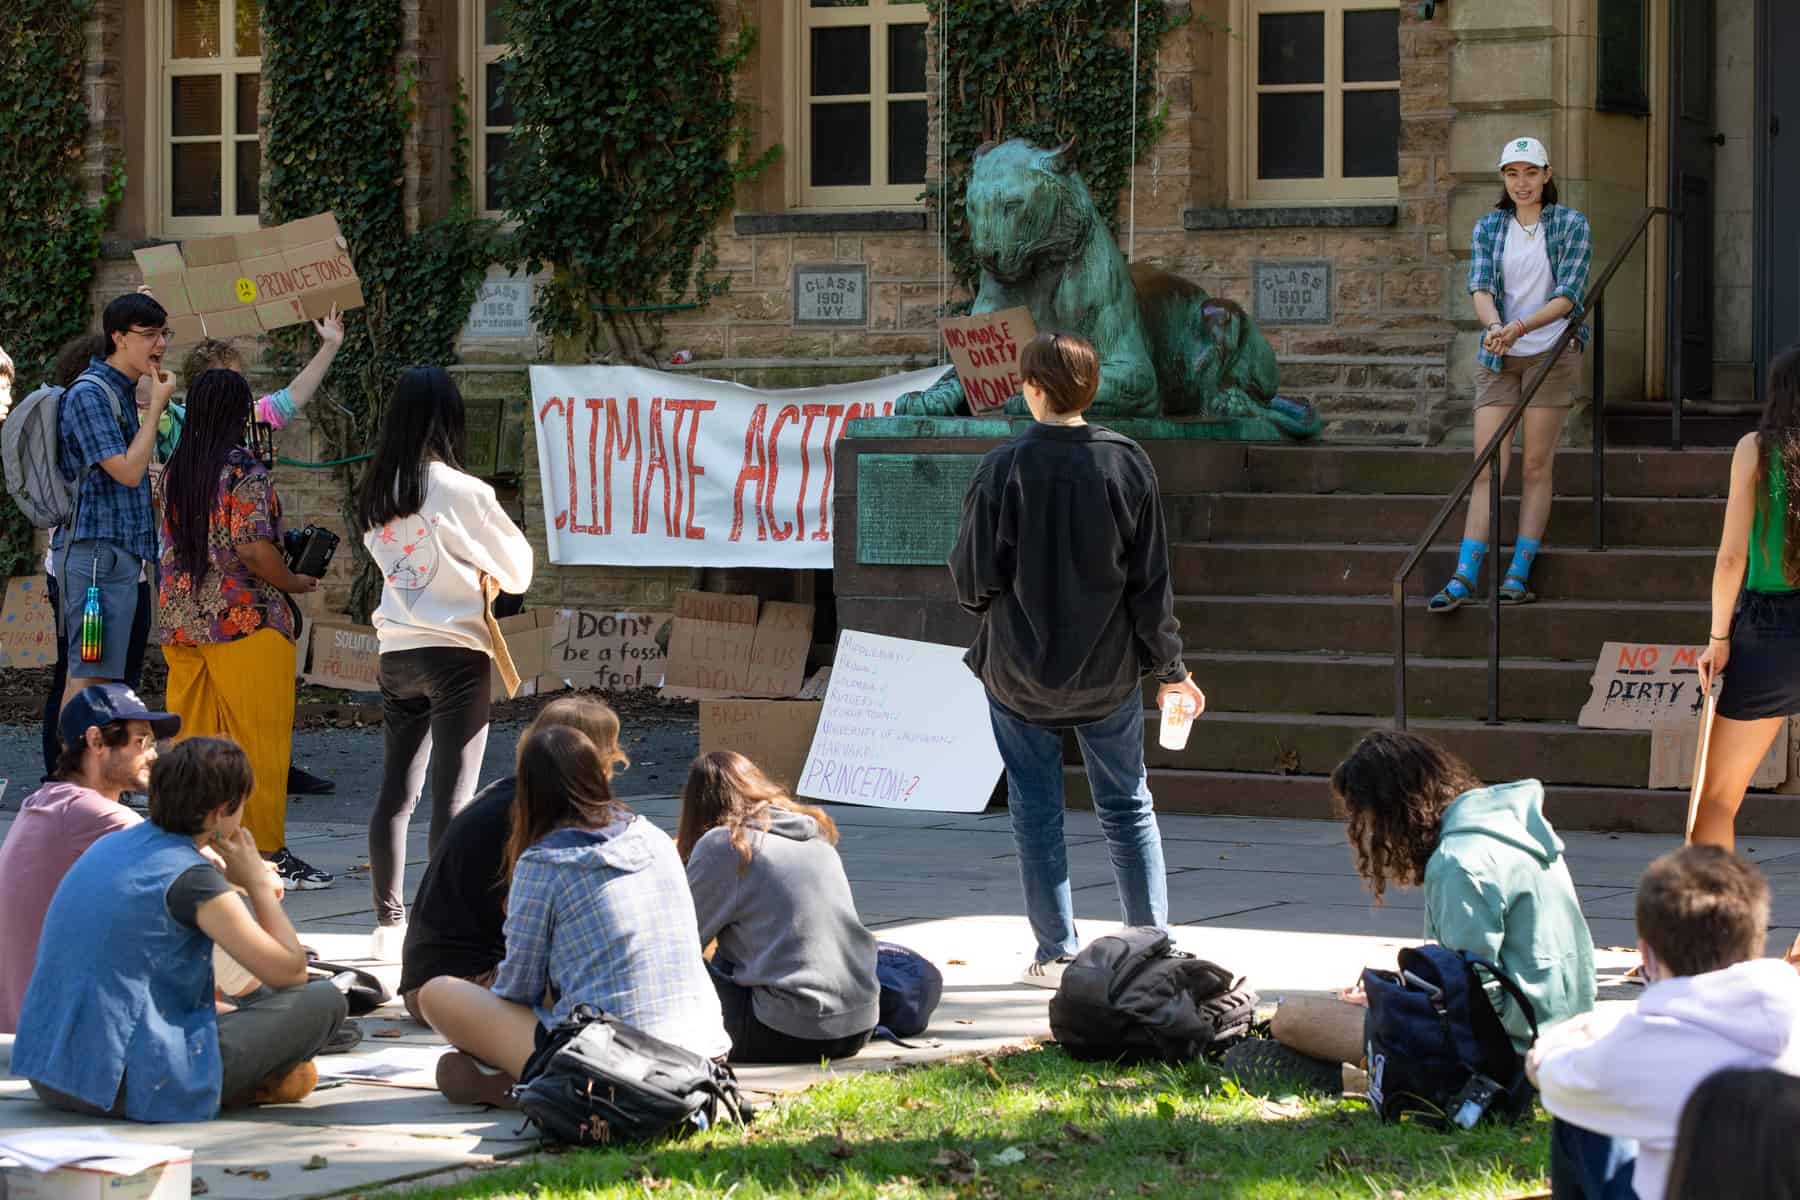 Photos: Students call on Princeton University to divest fully from fossil fuel industry